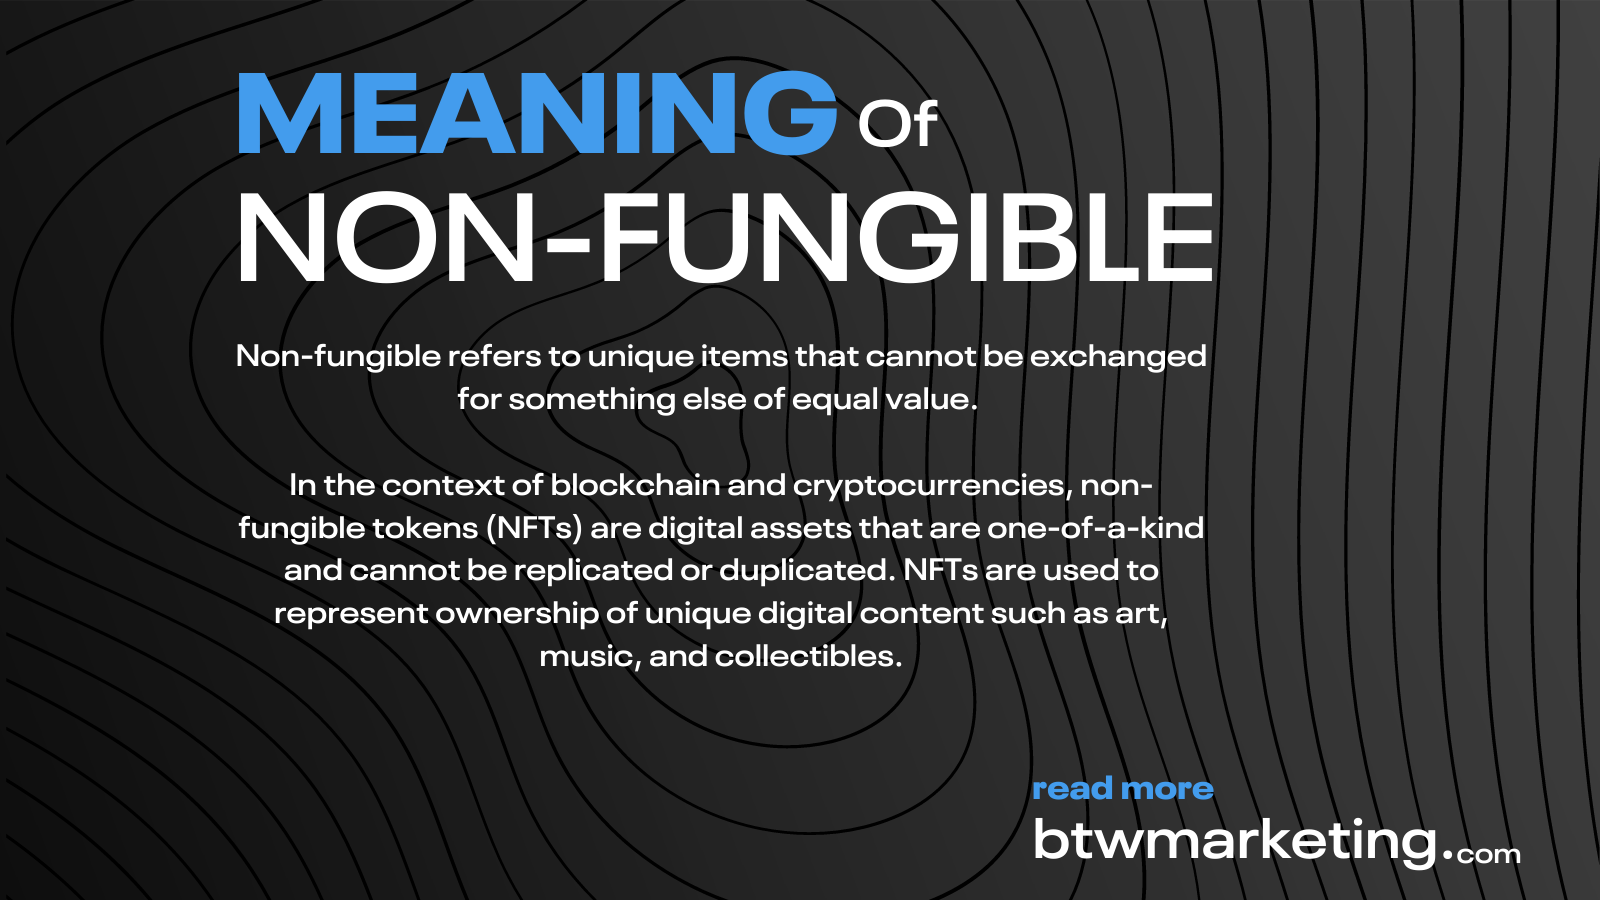 Non-fungible tokens, or NFTs, have been making headlines lately, but what exactly does "non-fungible" mean? In simple terms, non-fungible means that something is unique and cannot be exchanged for something else on a one-to-one basis